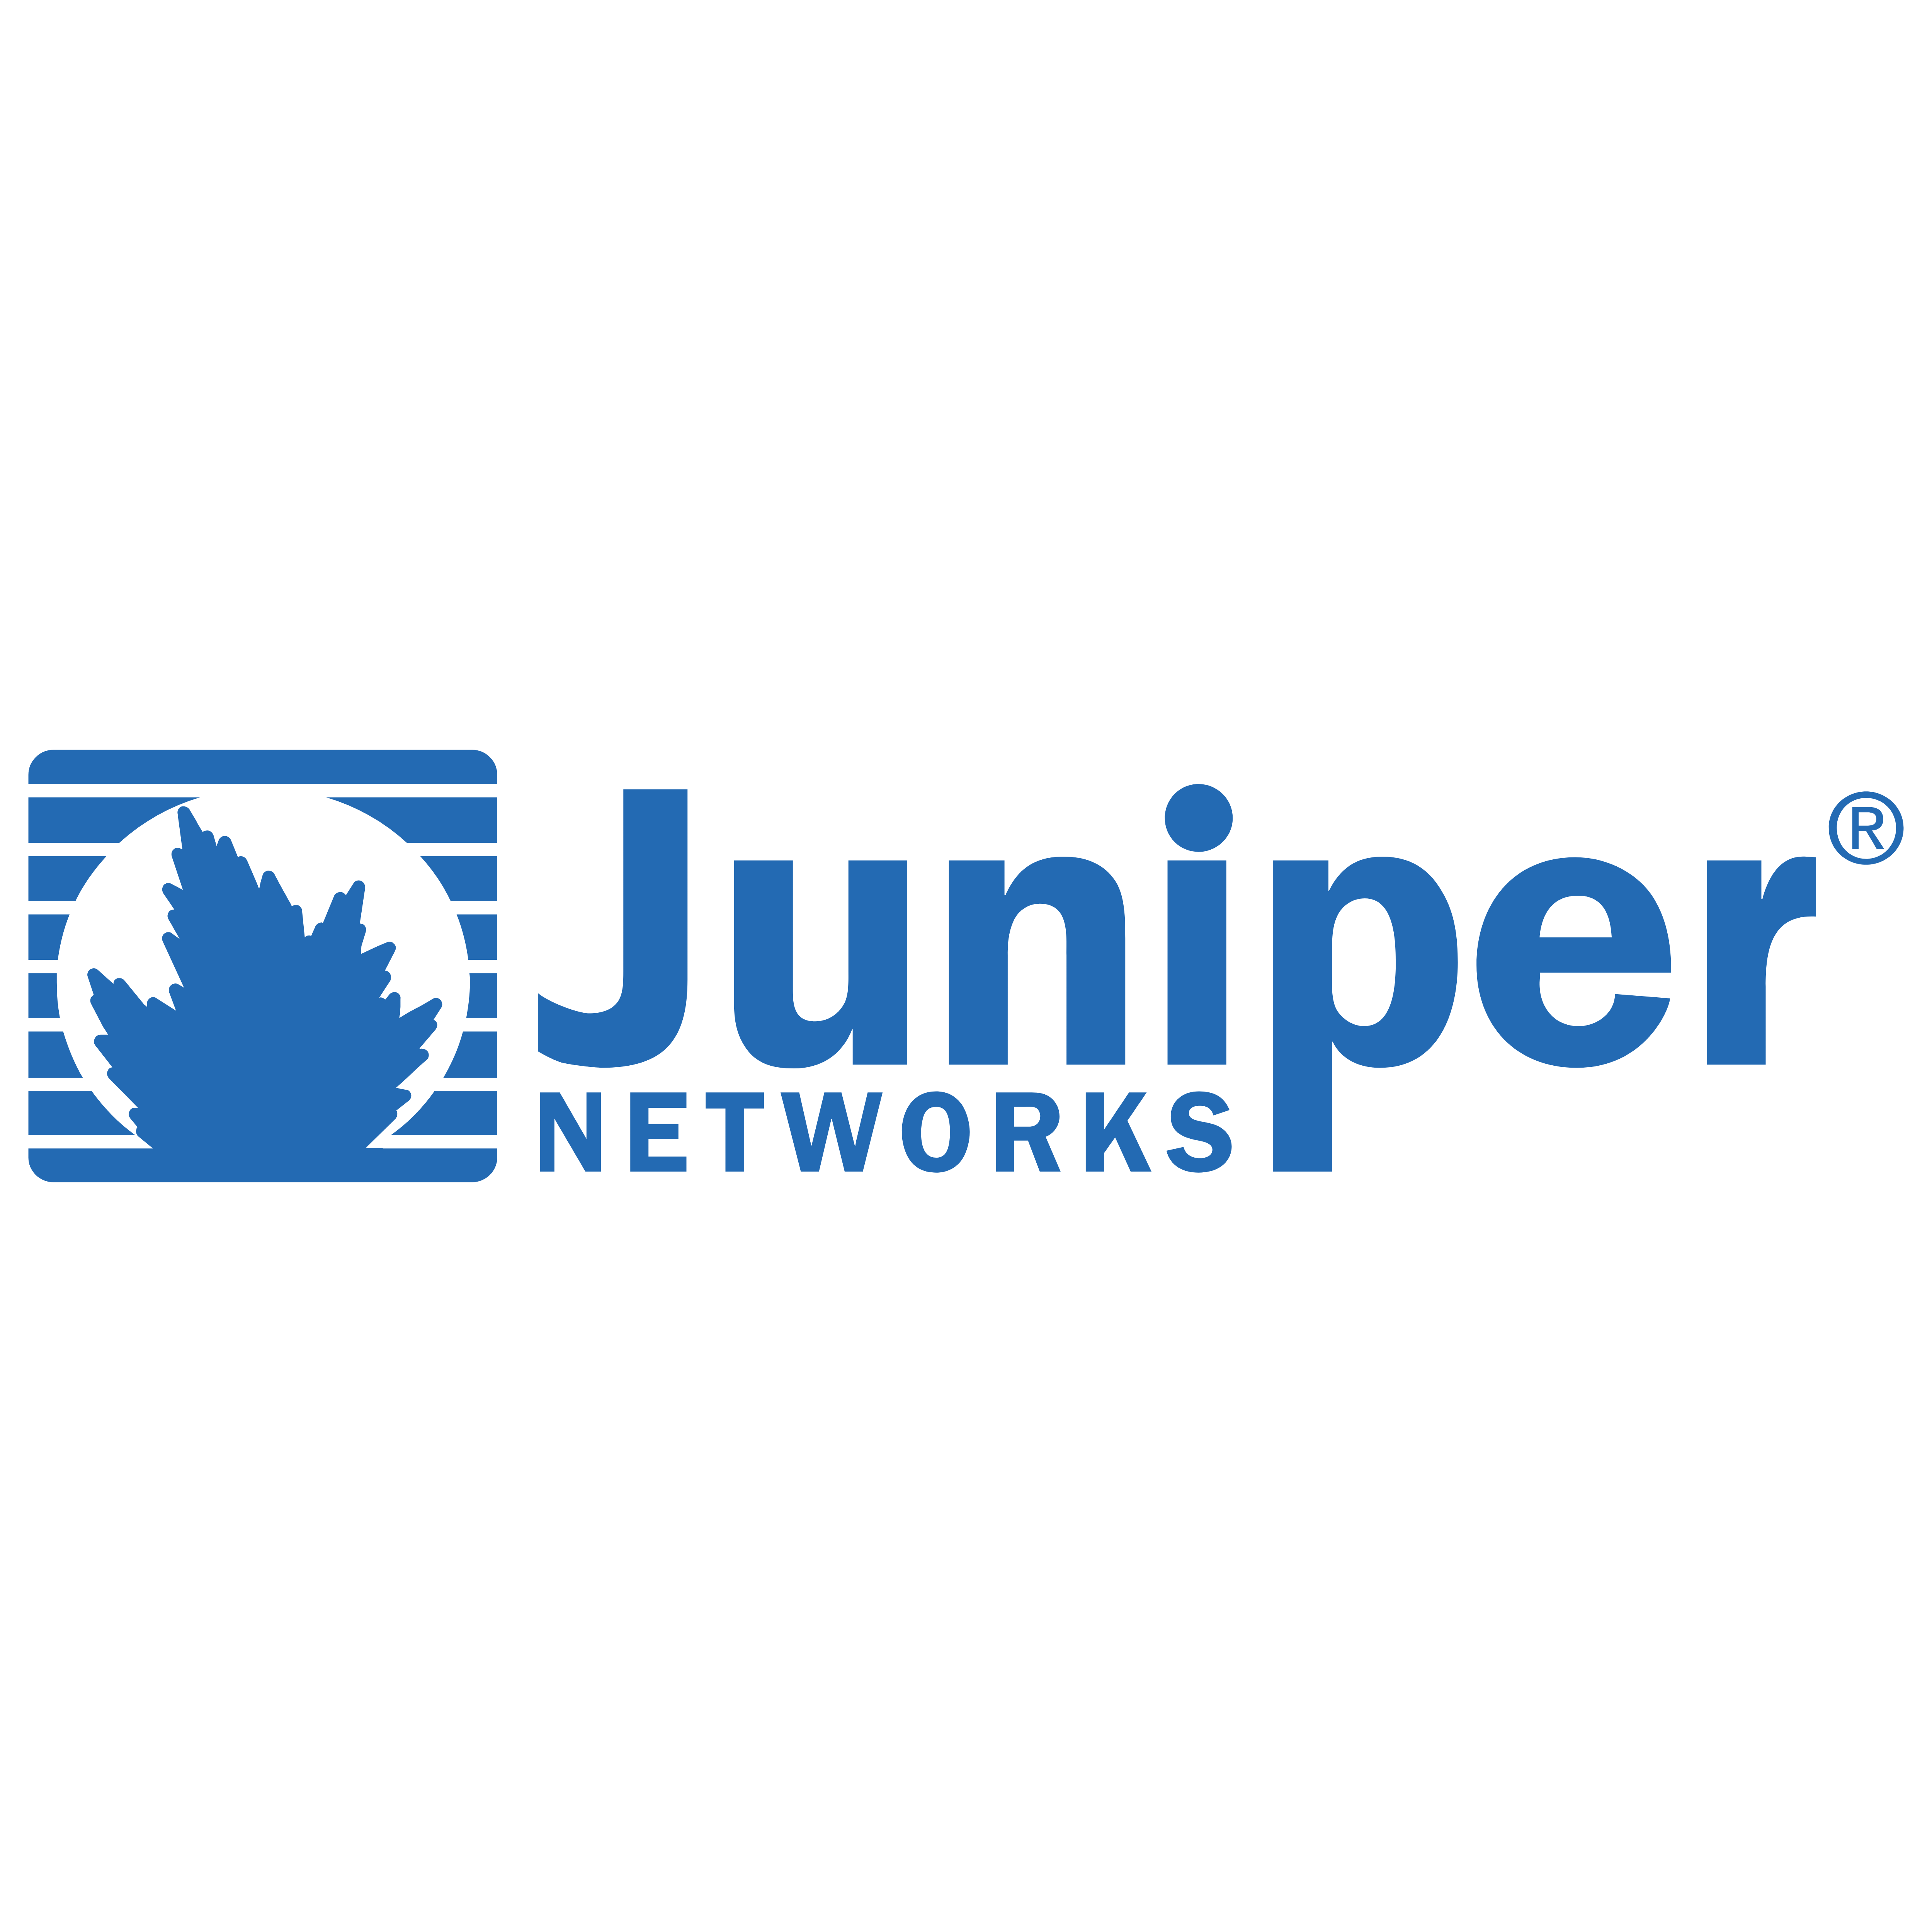 Juniper networks free download carefirst doctor reviews